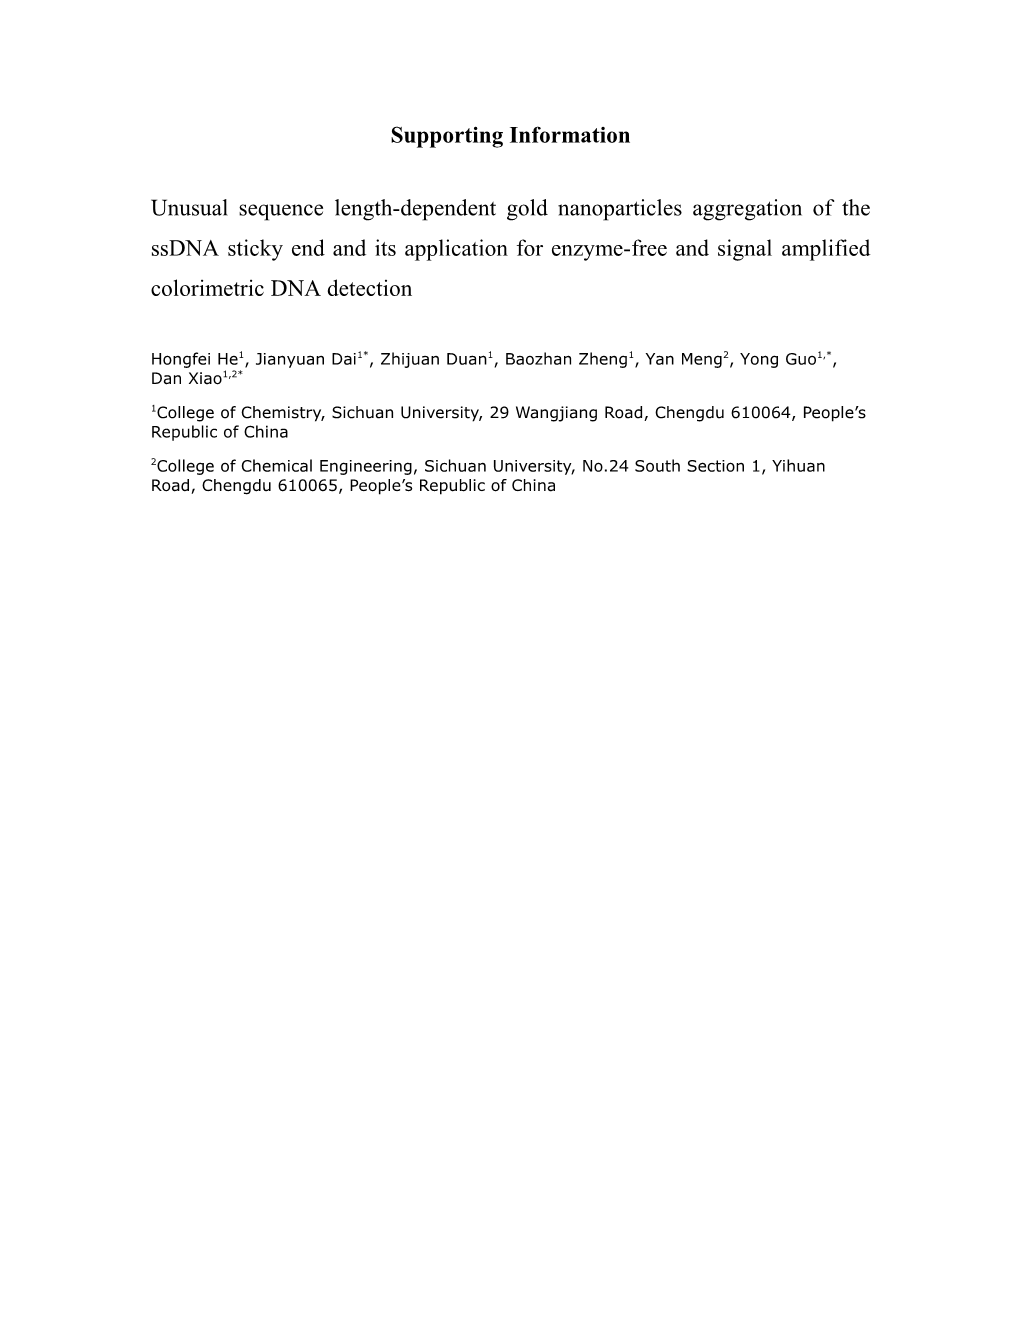 Unusual Sequence Length-Dependent Gold Nanoparticles Aggregation and Its Application For